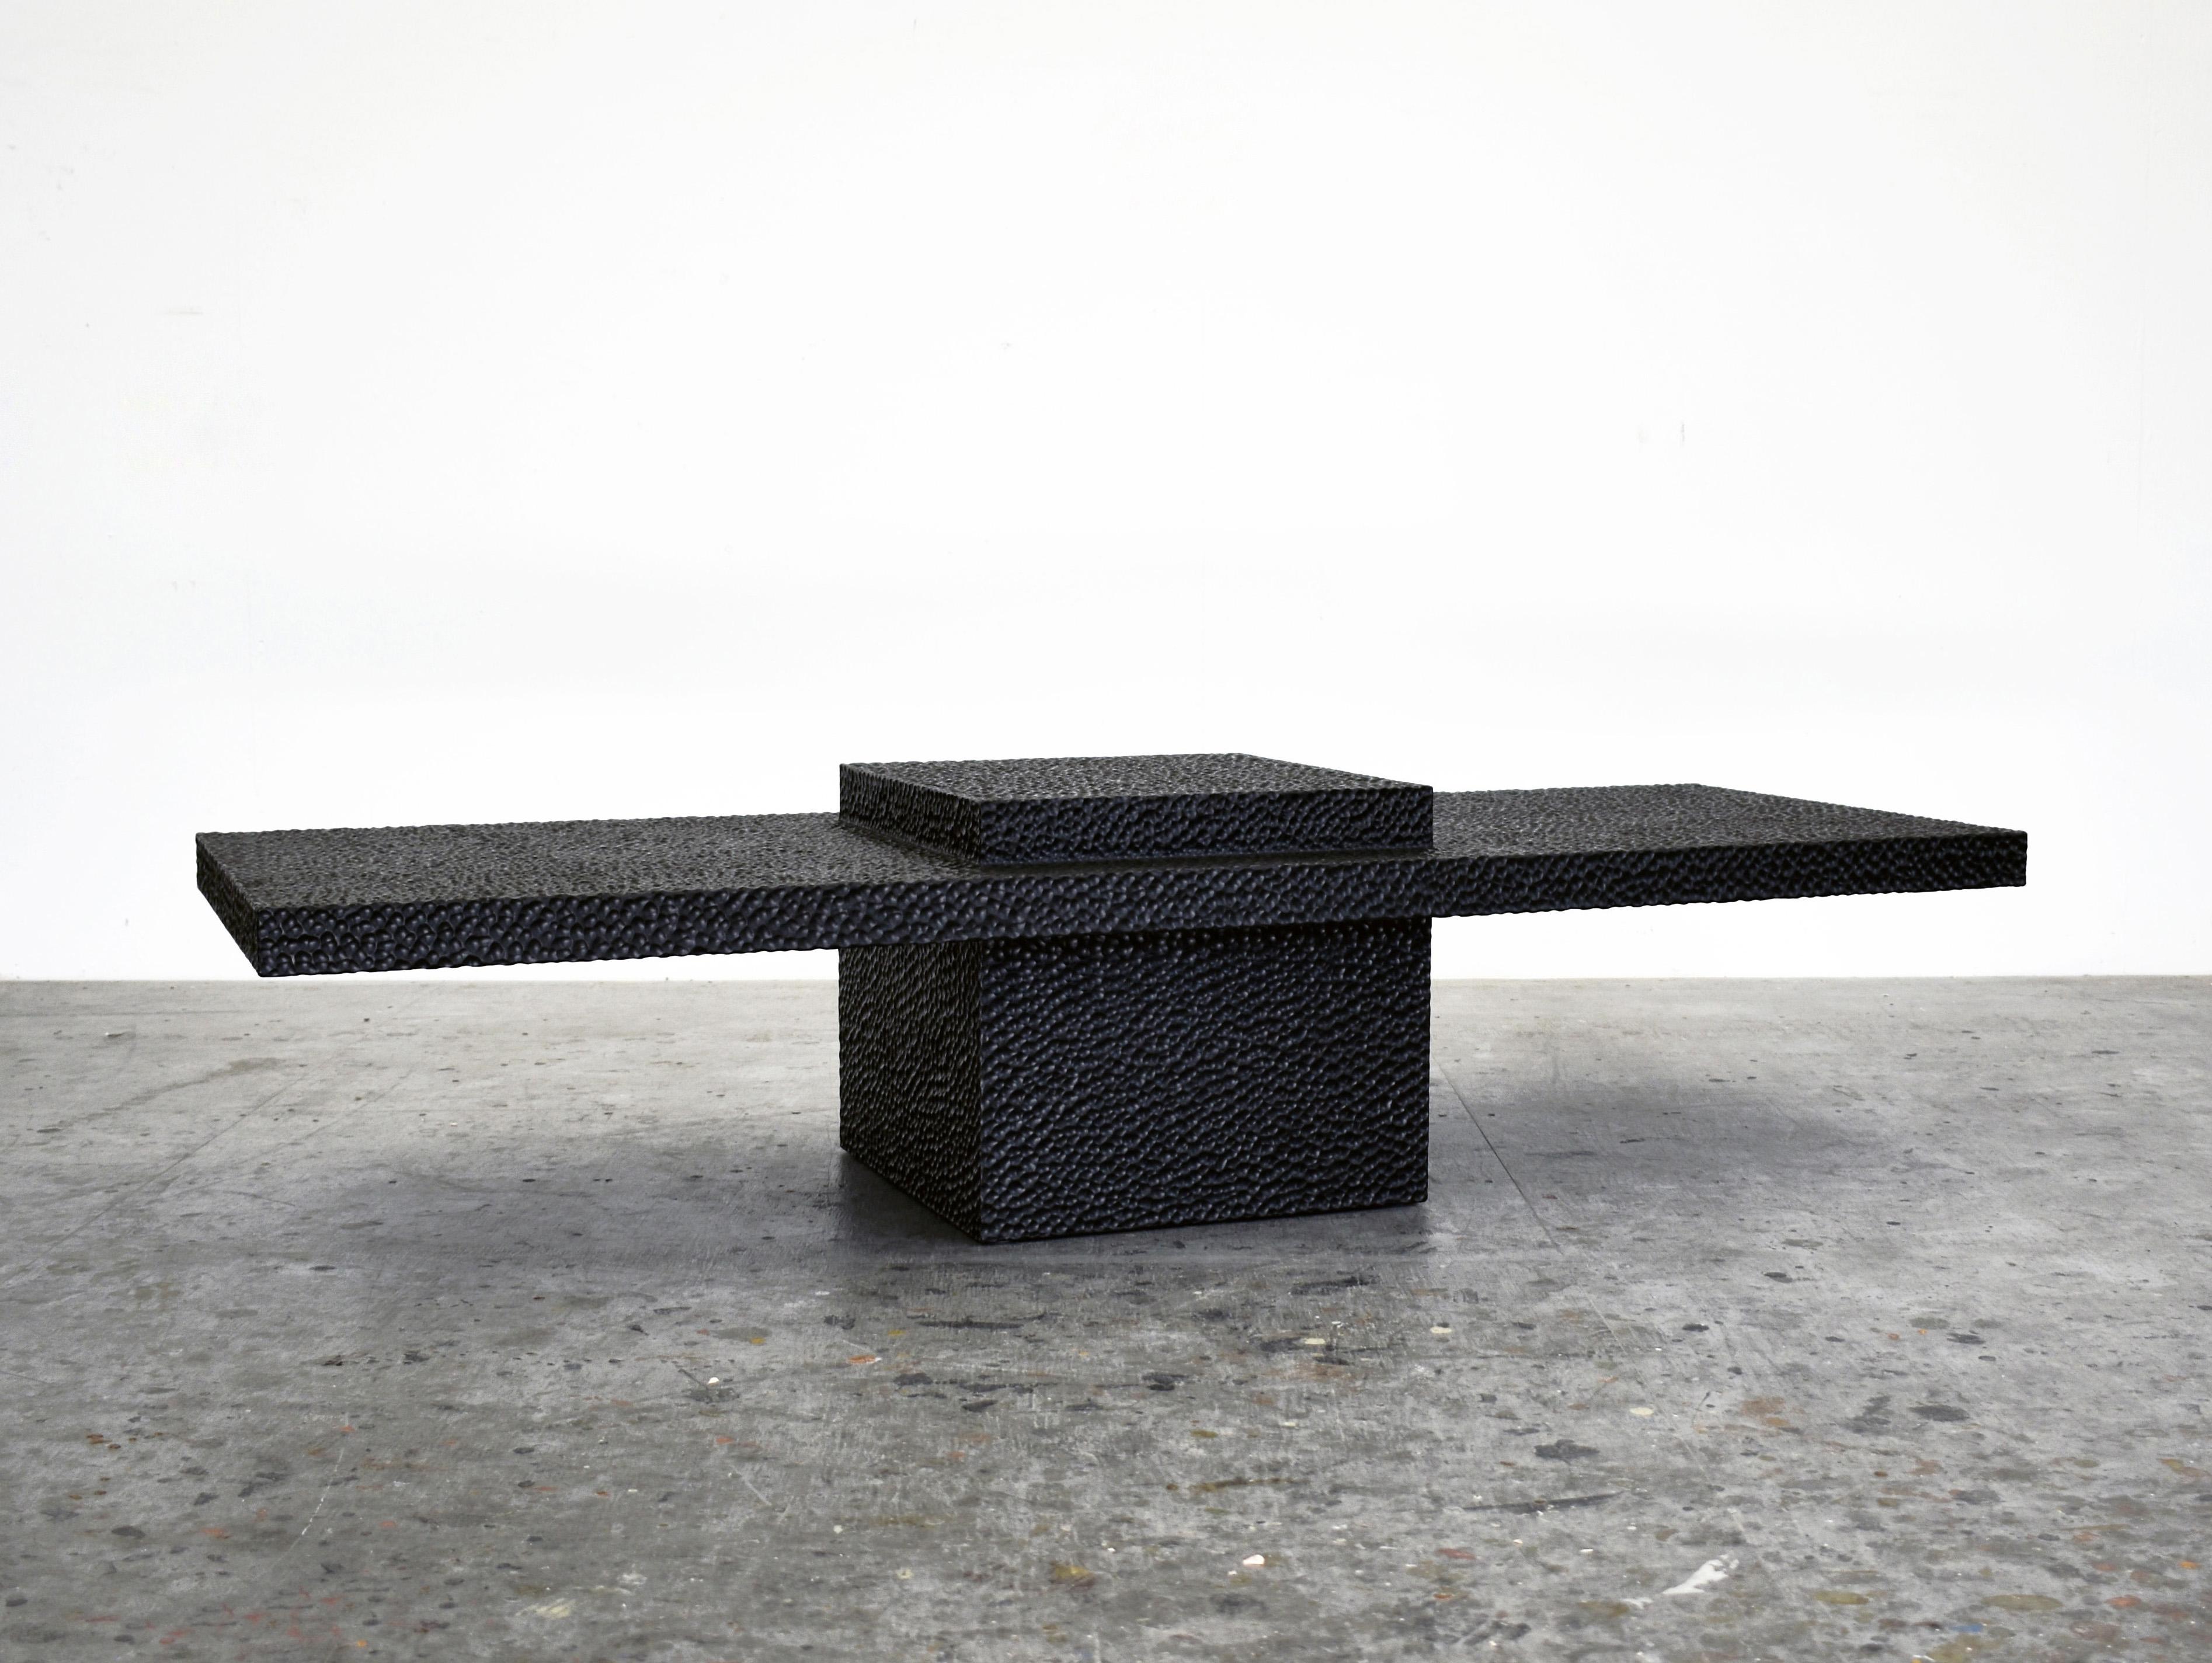 T1 Coffee table by John Eric Byers
Dimensions: 35.5 x 152.4 x 55.9 cm
Materials: Carved blackened maple

All works are individually handmade to order.

John Eric Byers creates geometrically inspired pieces that are minimal, emotional, and modernly